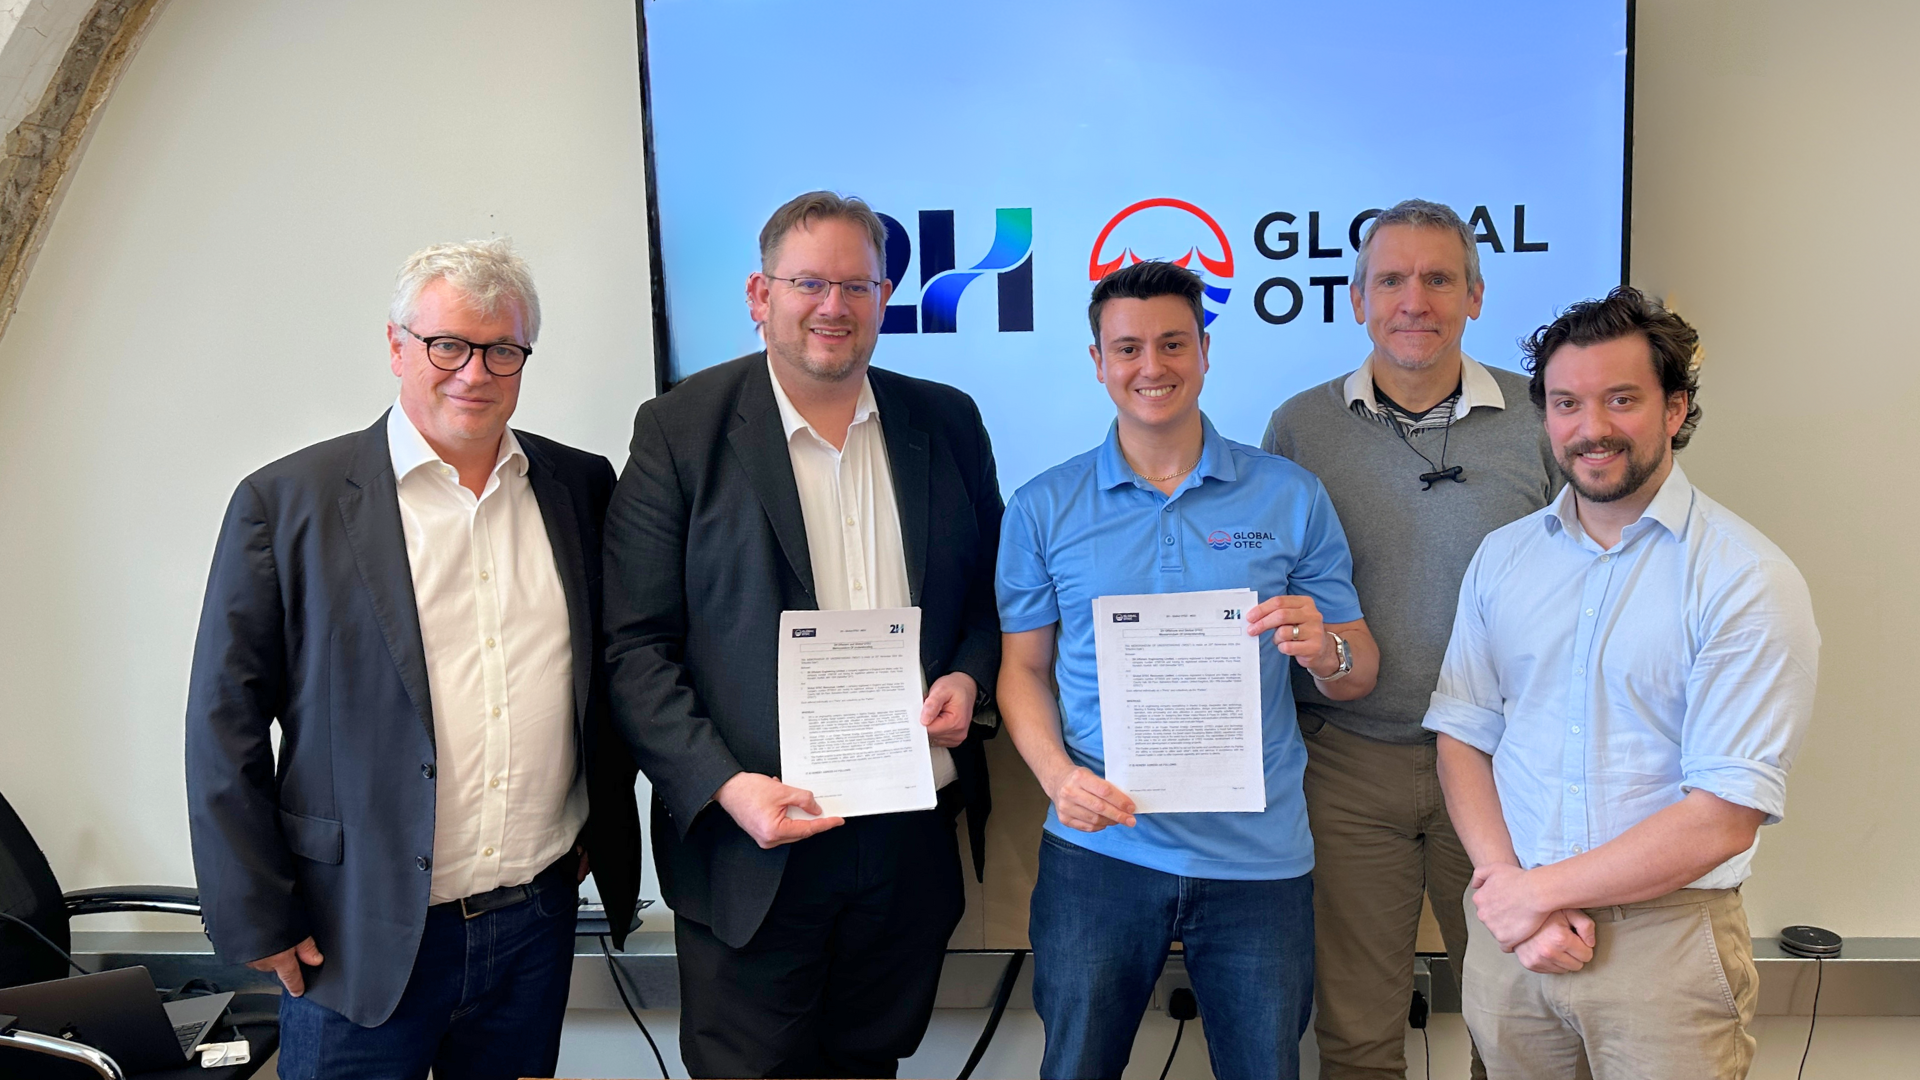 A Memorandum of Understanding (MoU) was signed in London, last week, by the Director of the 2H France office, Pierre Guerin, the Managing Director at 2H, Yann Helle, Founder and CEO at Global OTEC, Dan Grech, the Commercial Director at Global OTEC Andreas Koall and the Lead Engineer at Global OTEC Sam Johnston